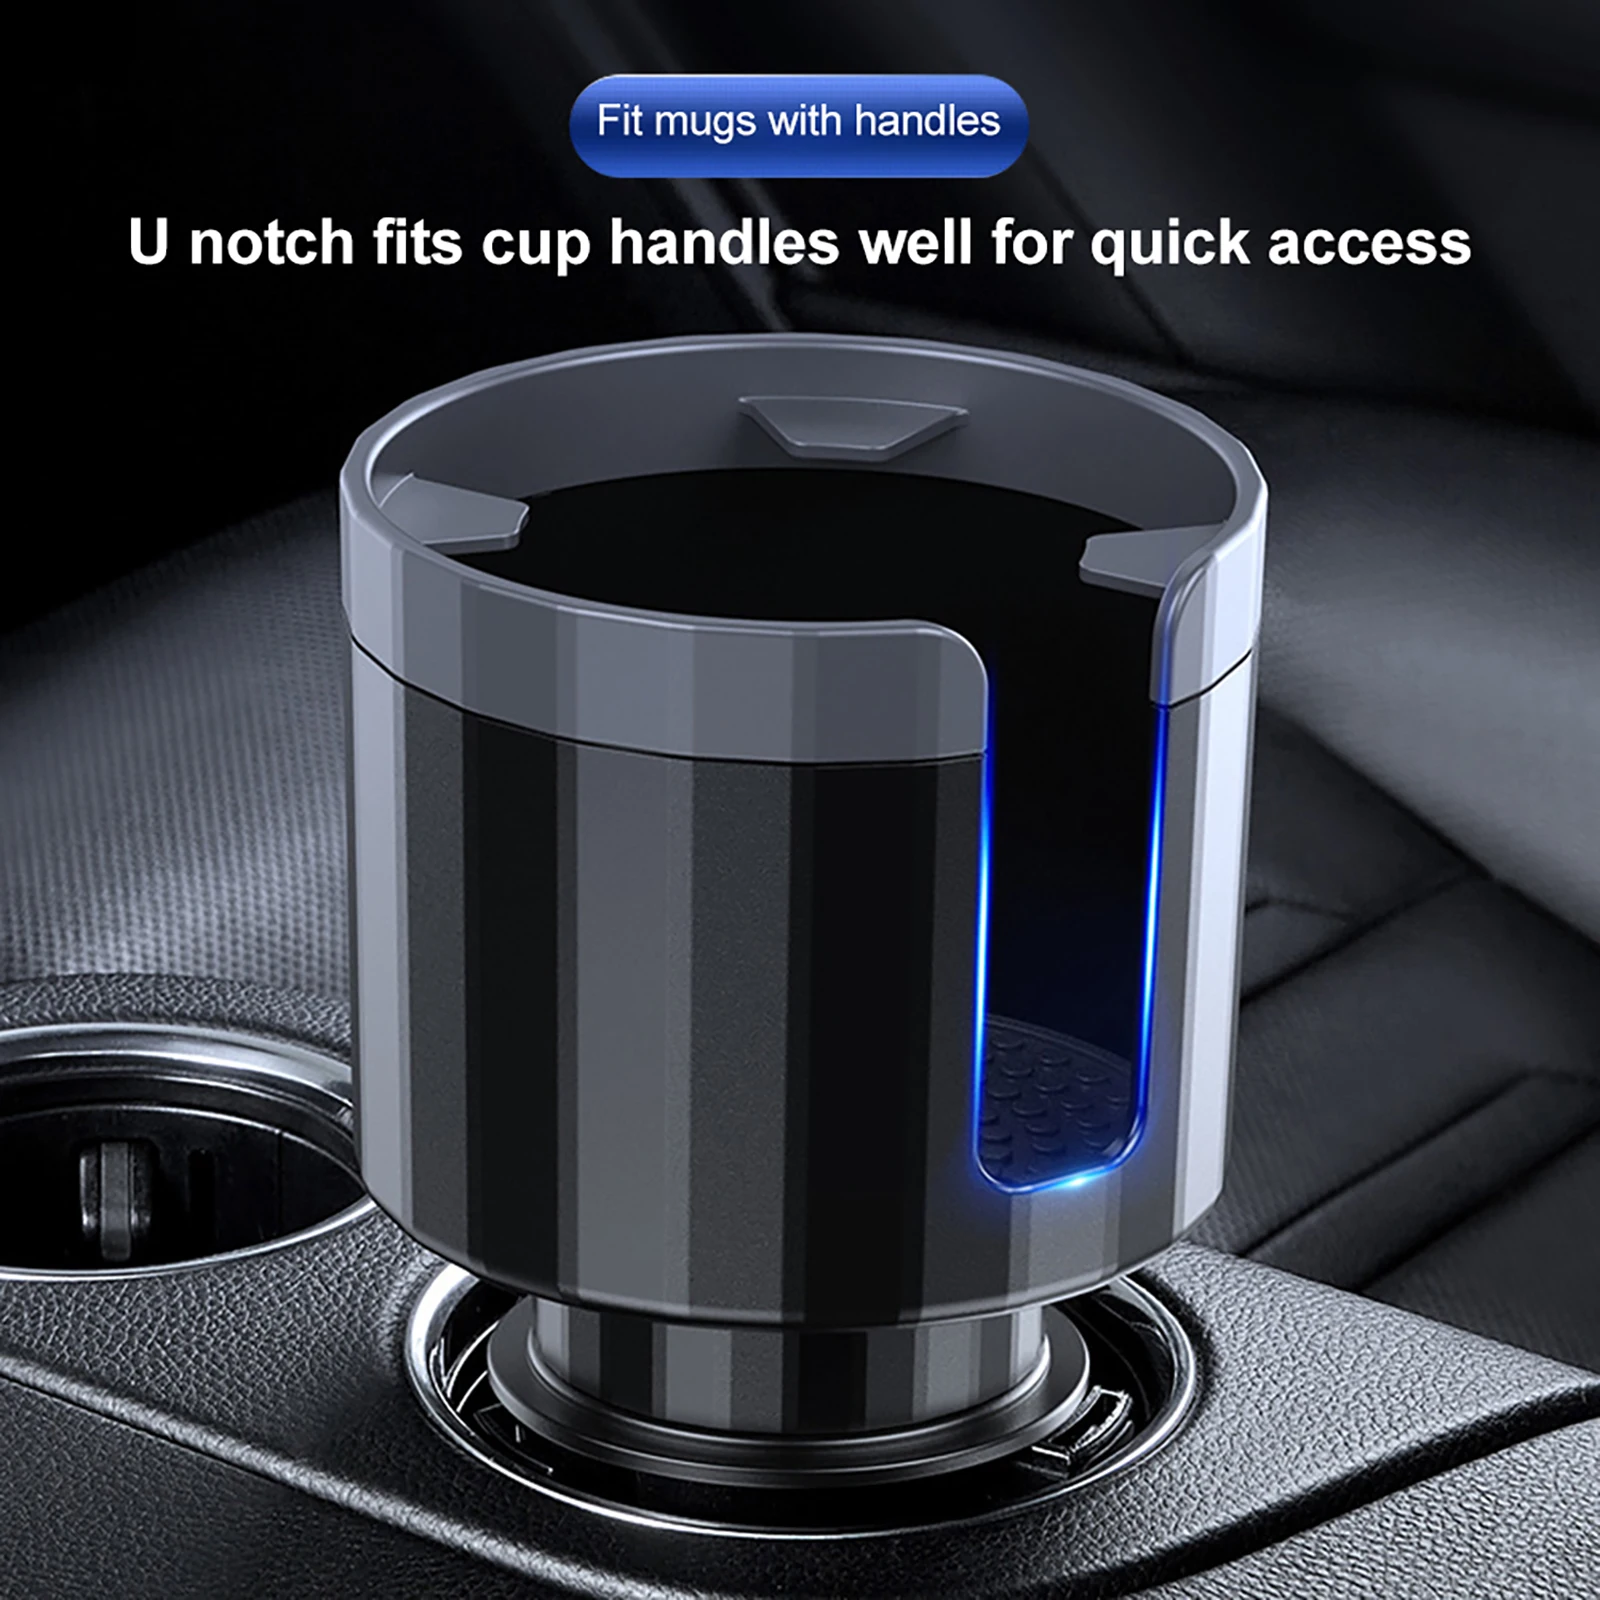 Car Cup Holder Expander Organizer With Adjustable Base Car Cup Holder Hold  Most Bottles And Cups Up To 105mm Console Cup Holder - Drinks Holders -  AliExpress